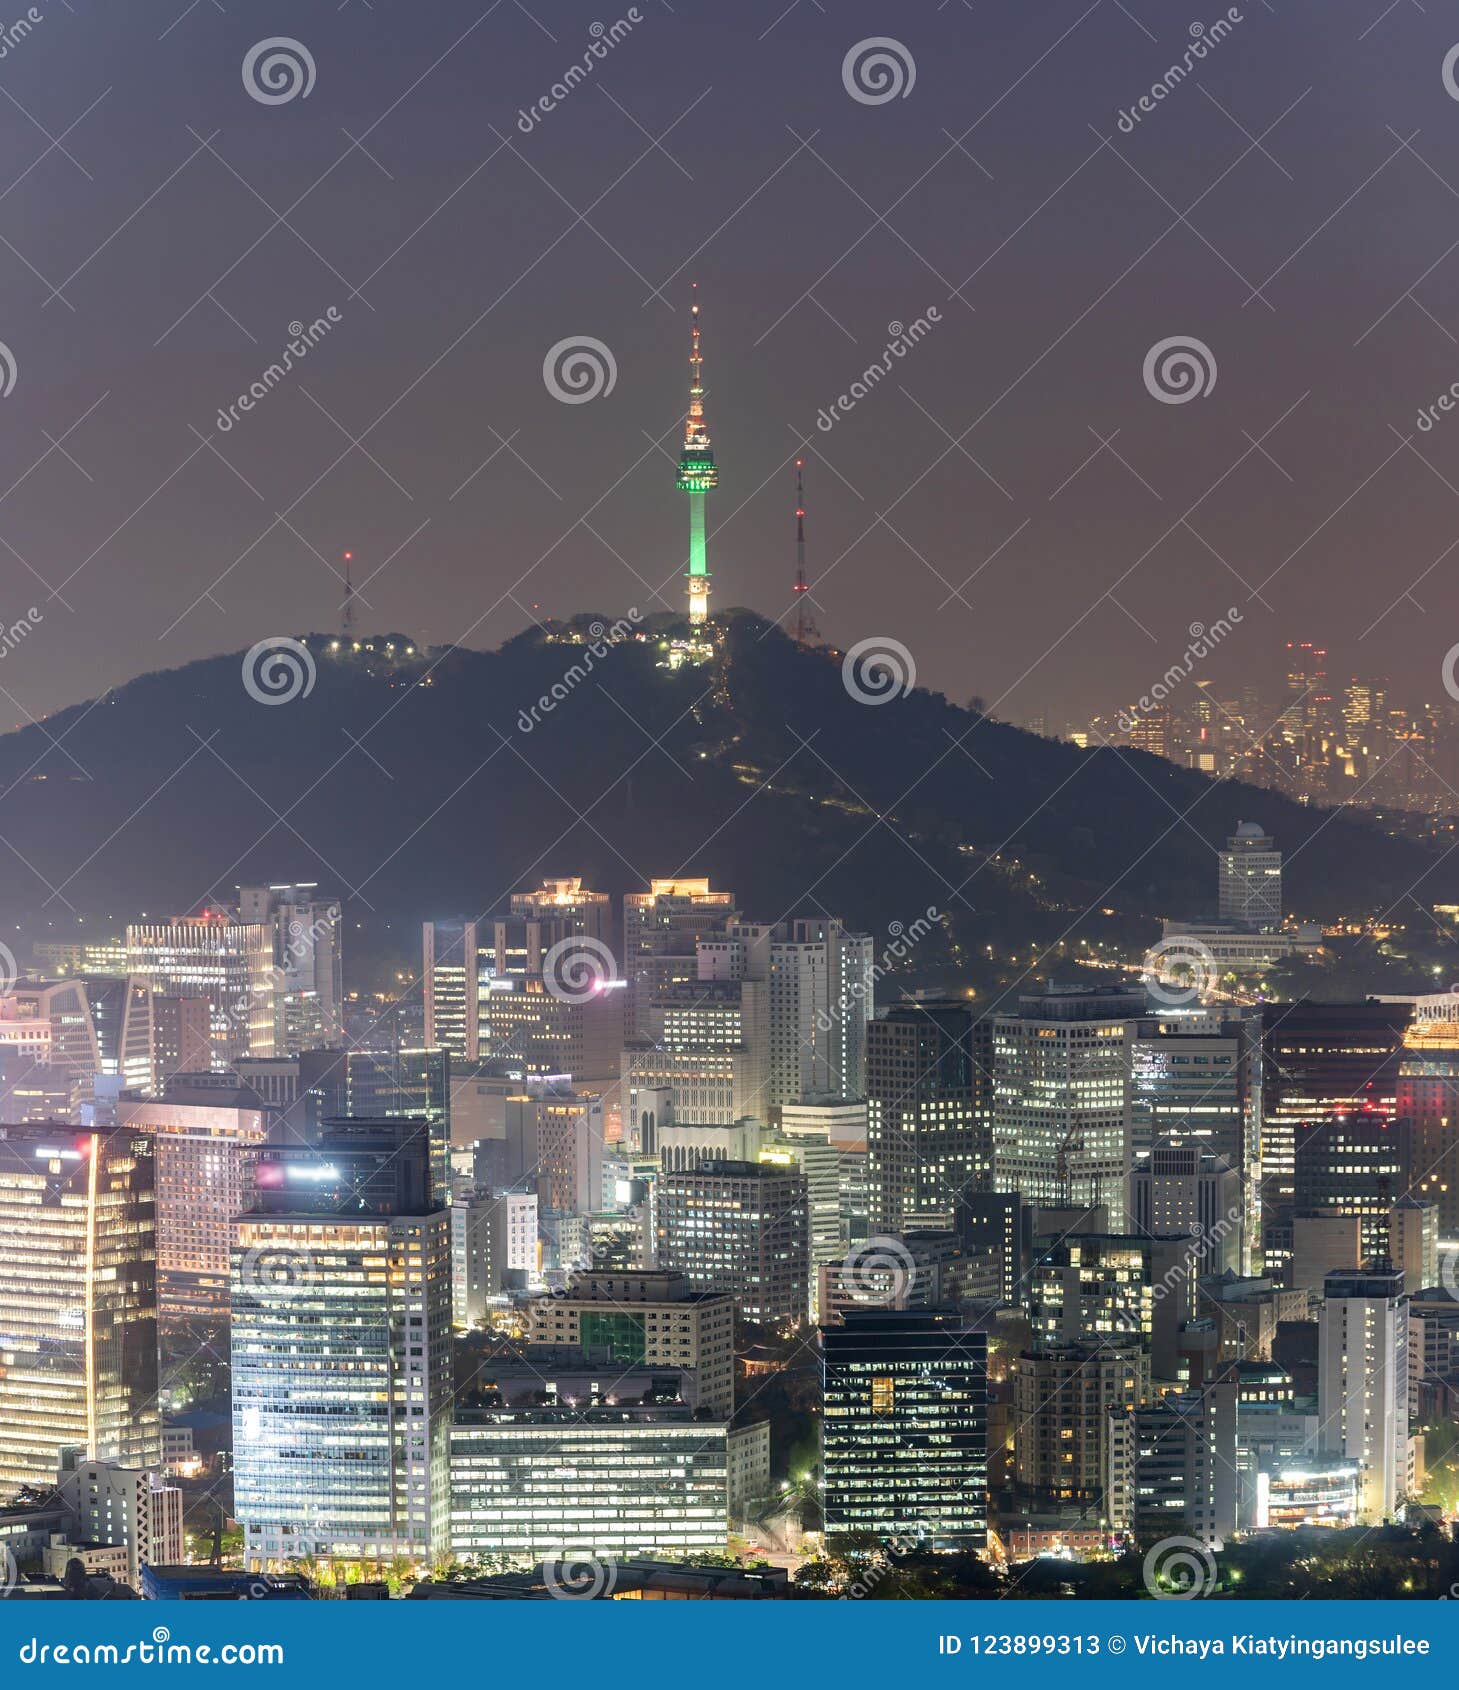 Night View of Seoul Downtown Cityscape Stock Image - Image of asia ...